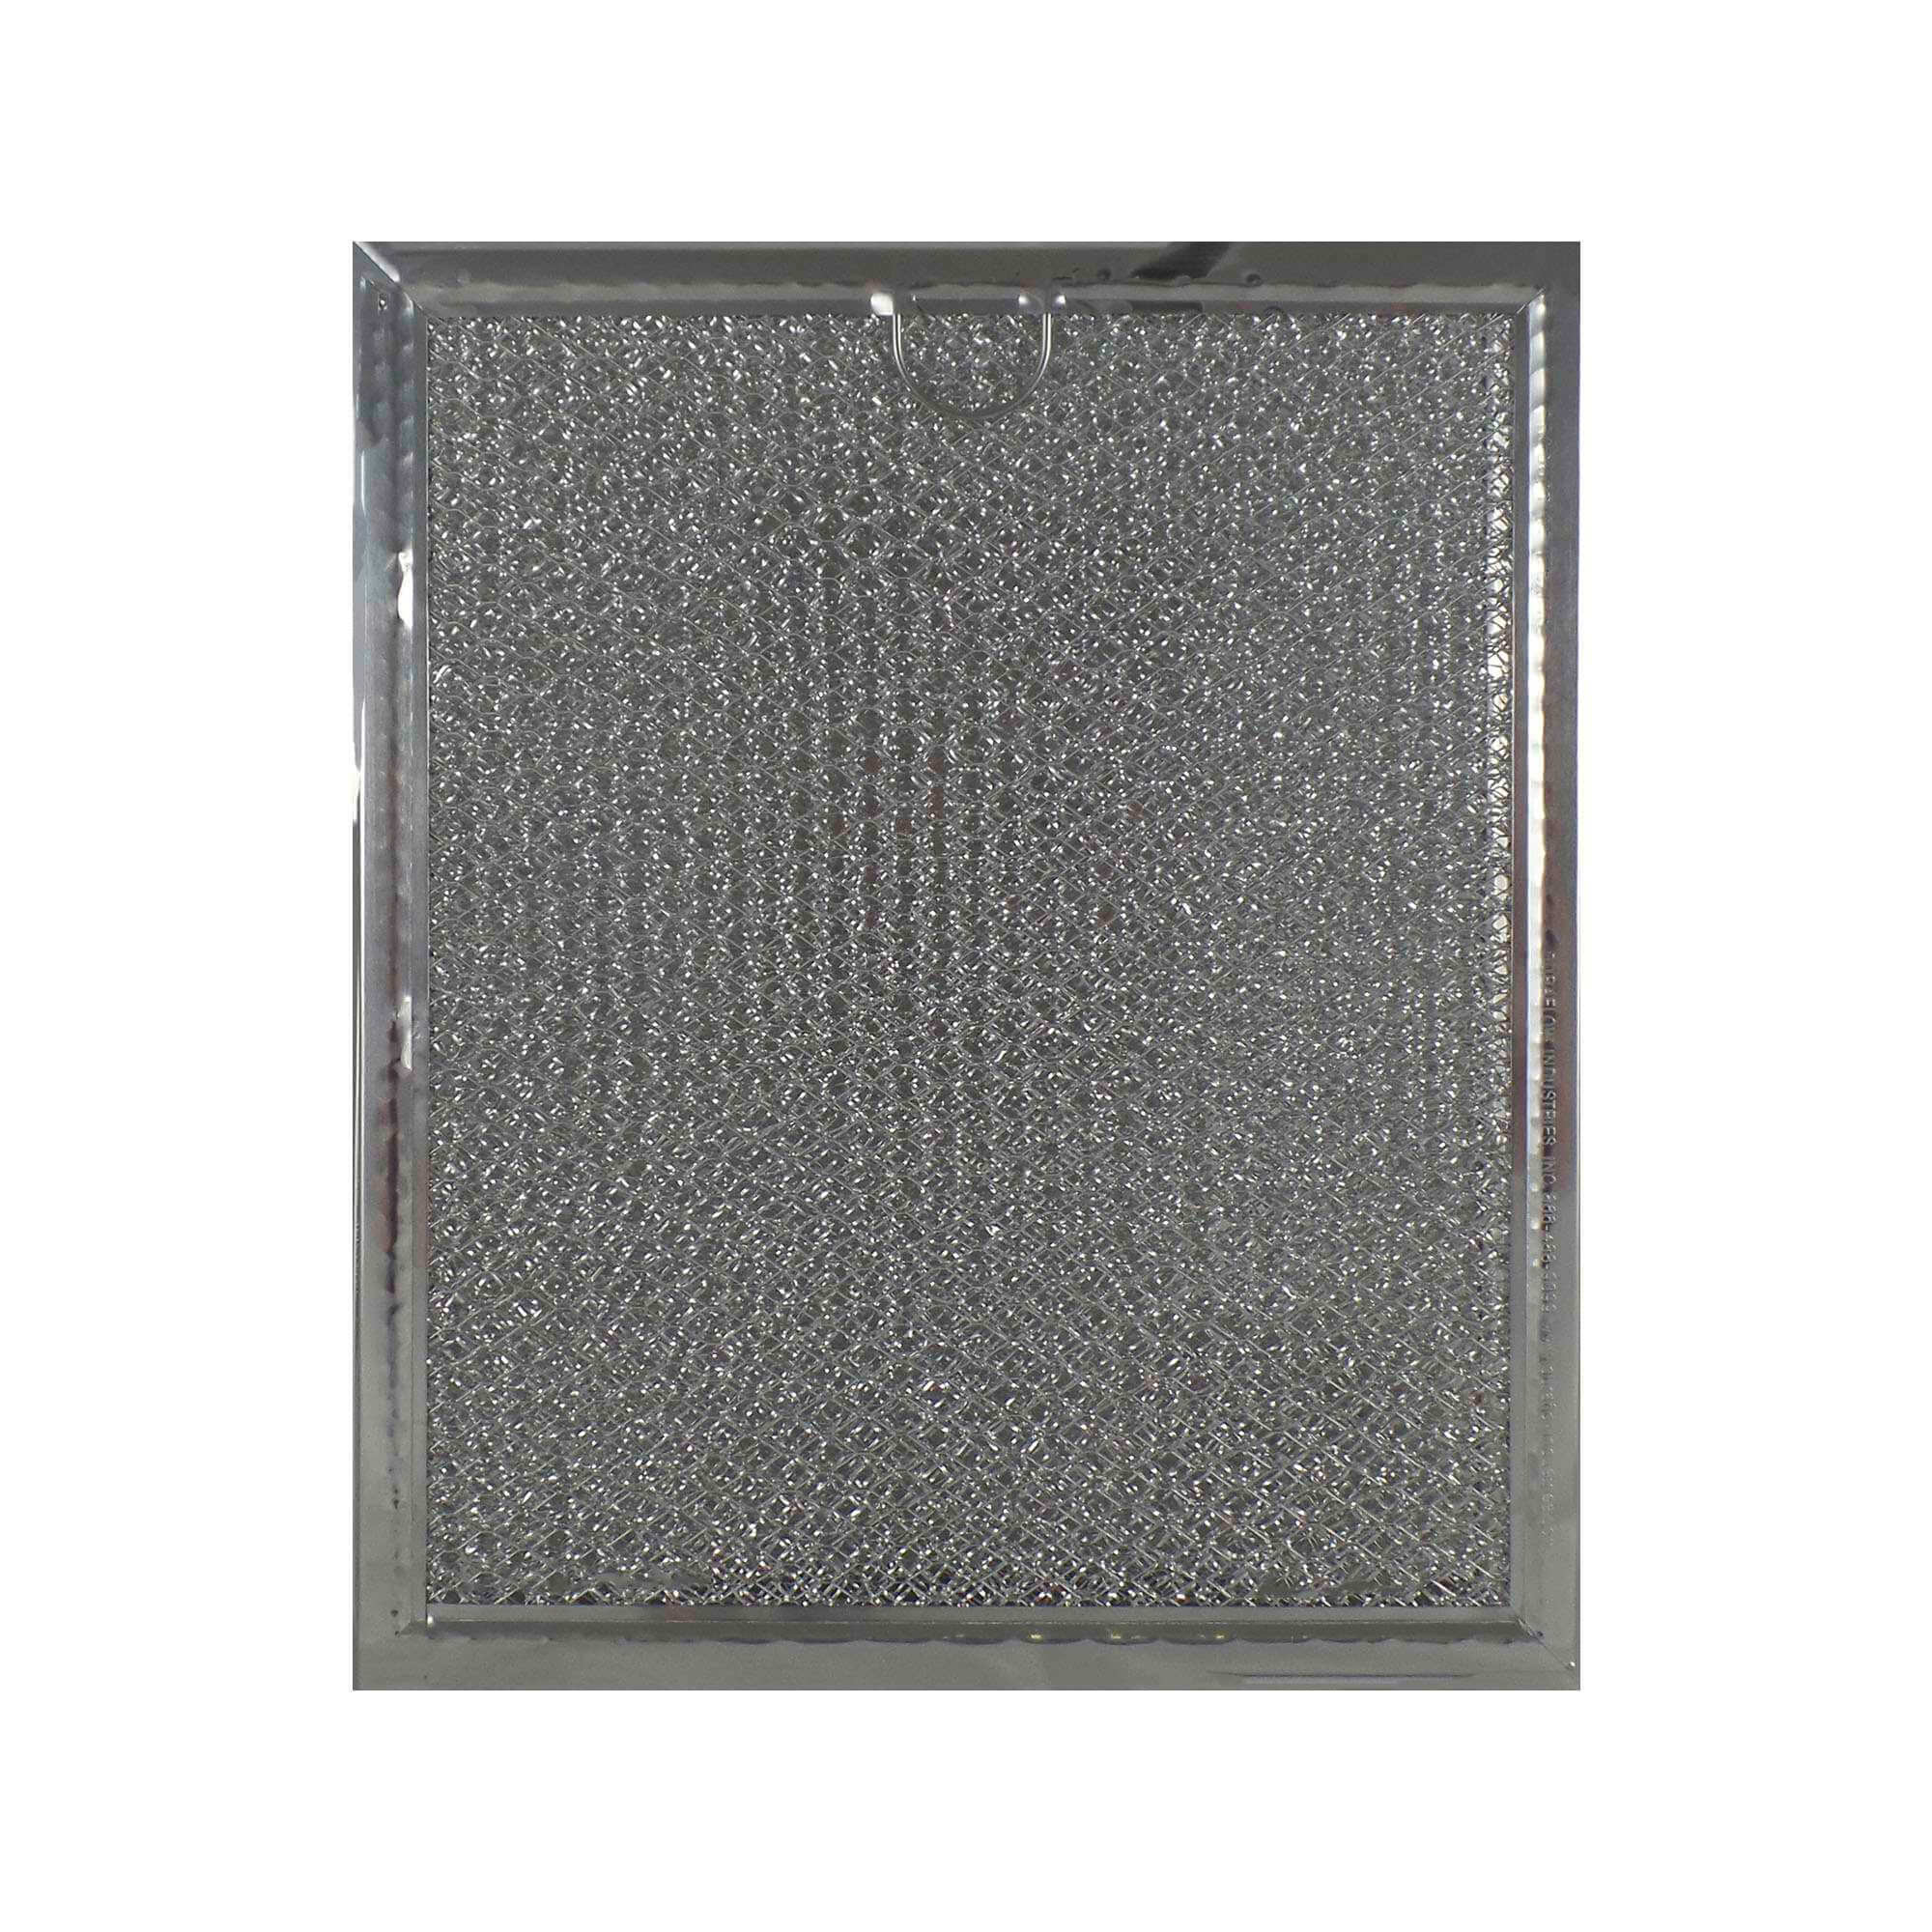 1 Filter SAMSUNG DE63-30011A Microwave Grease Filter 7 3/4 x 9 x 3/32 inch 